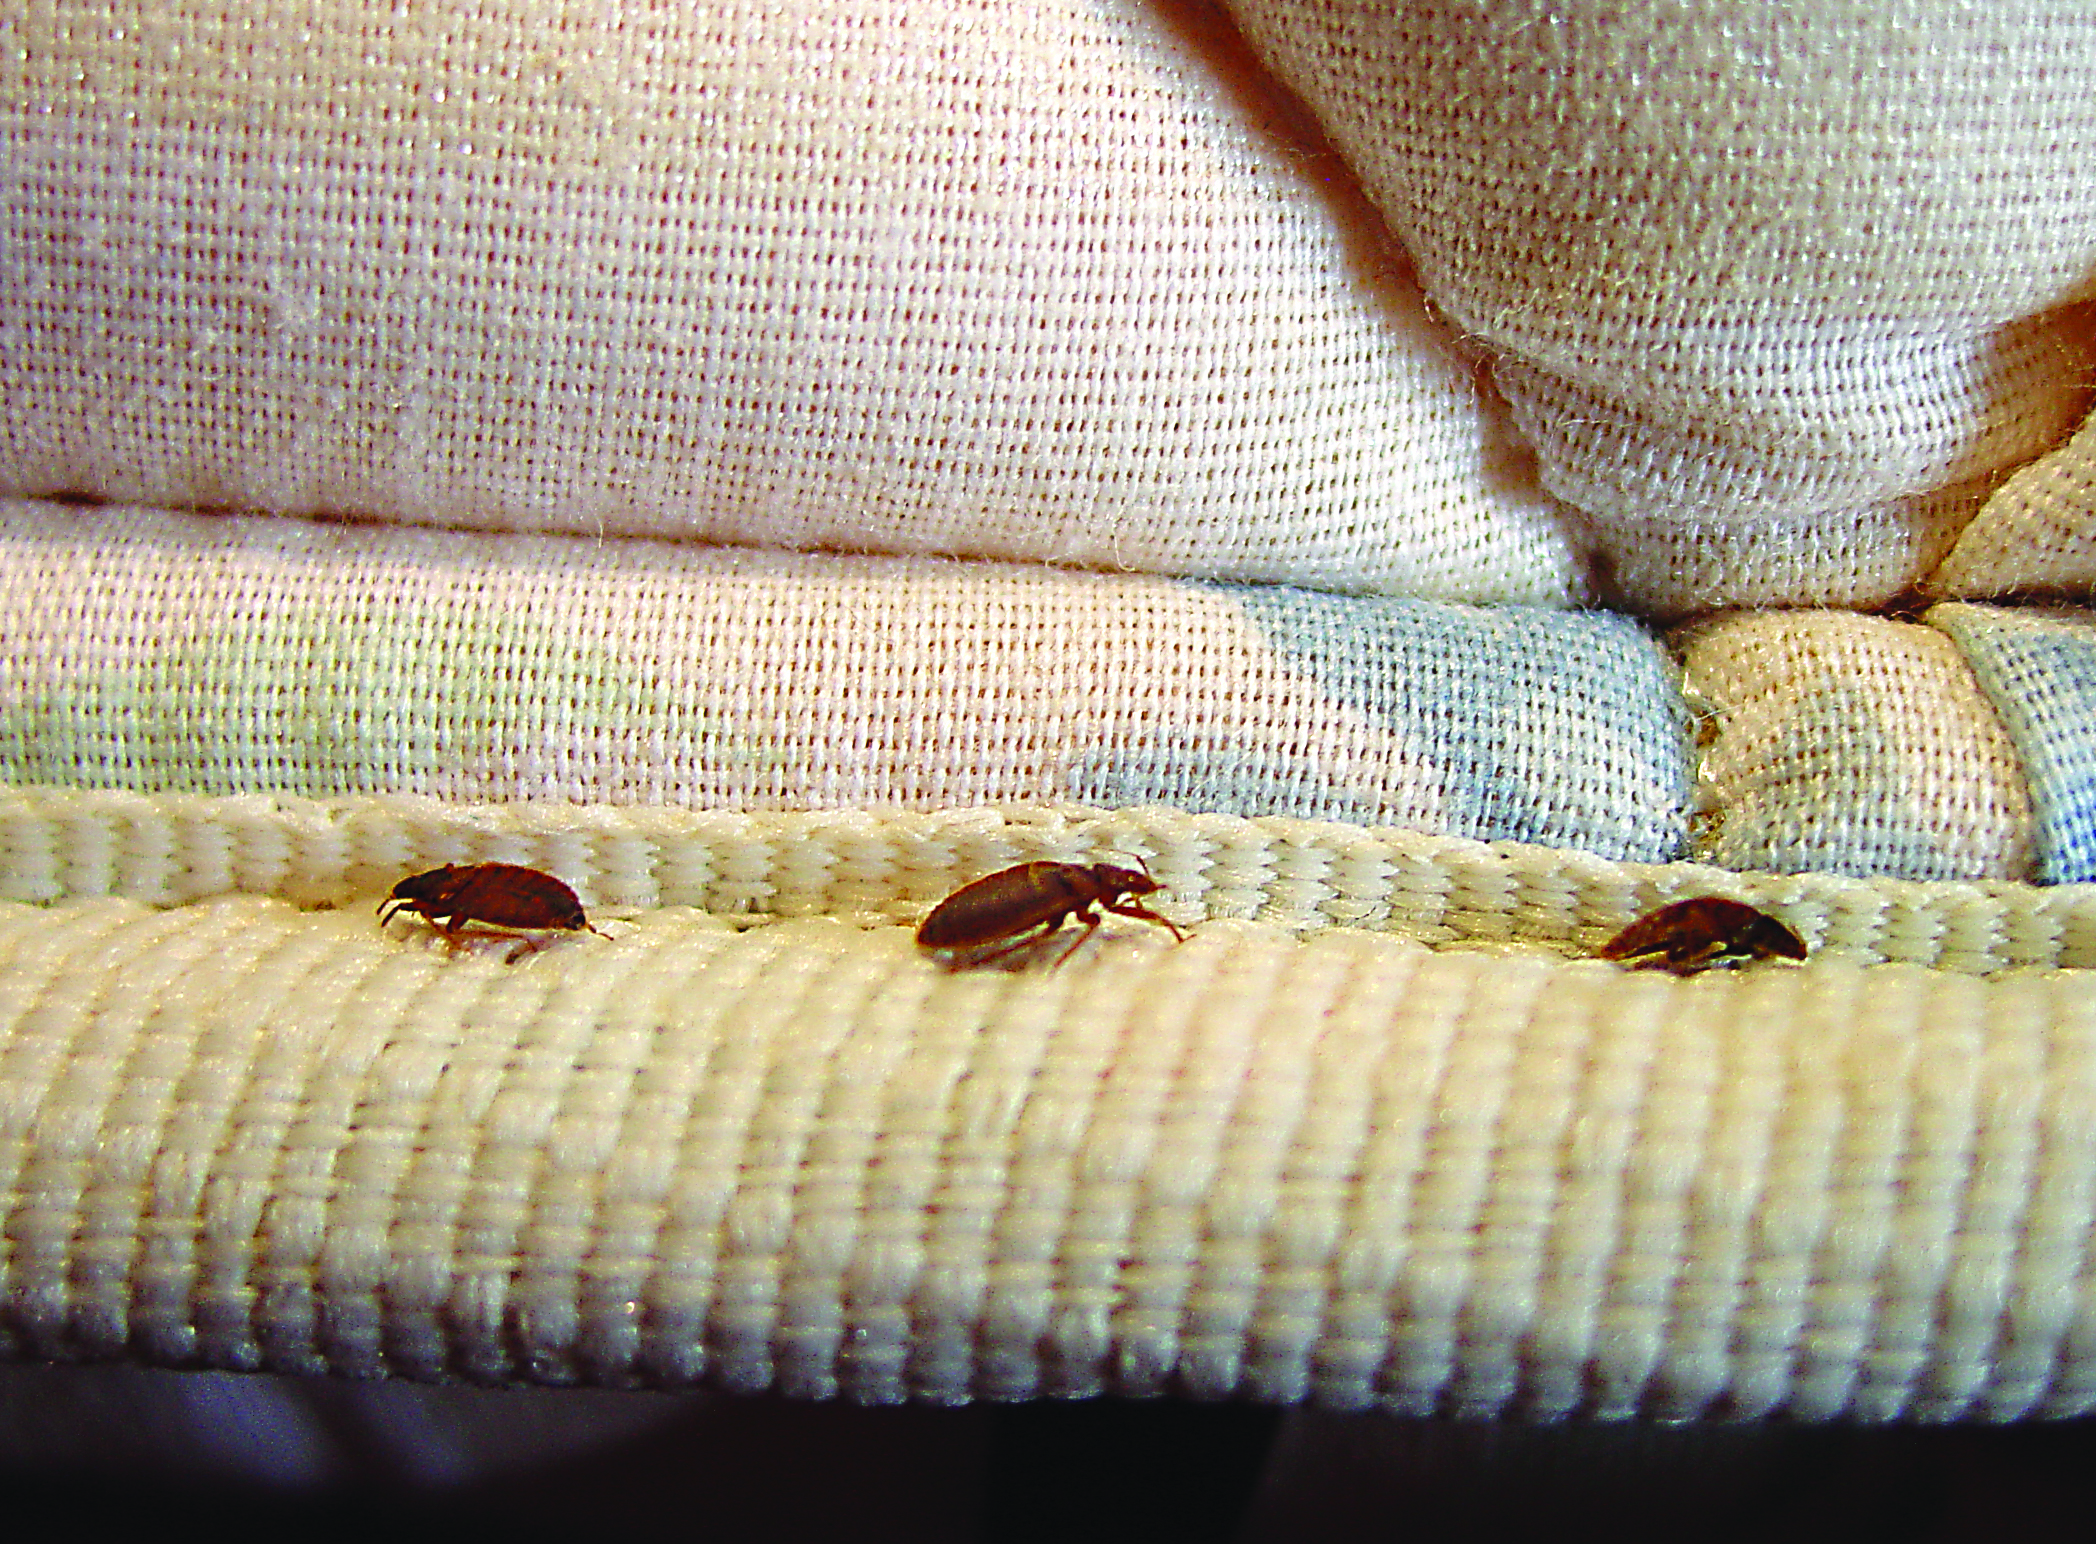 bed bugs from new mattress